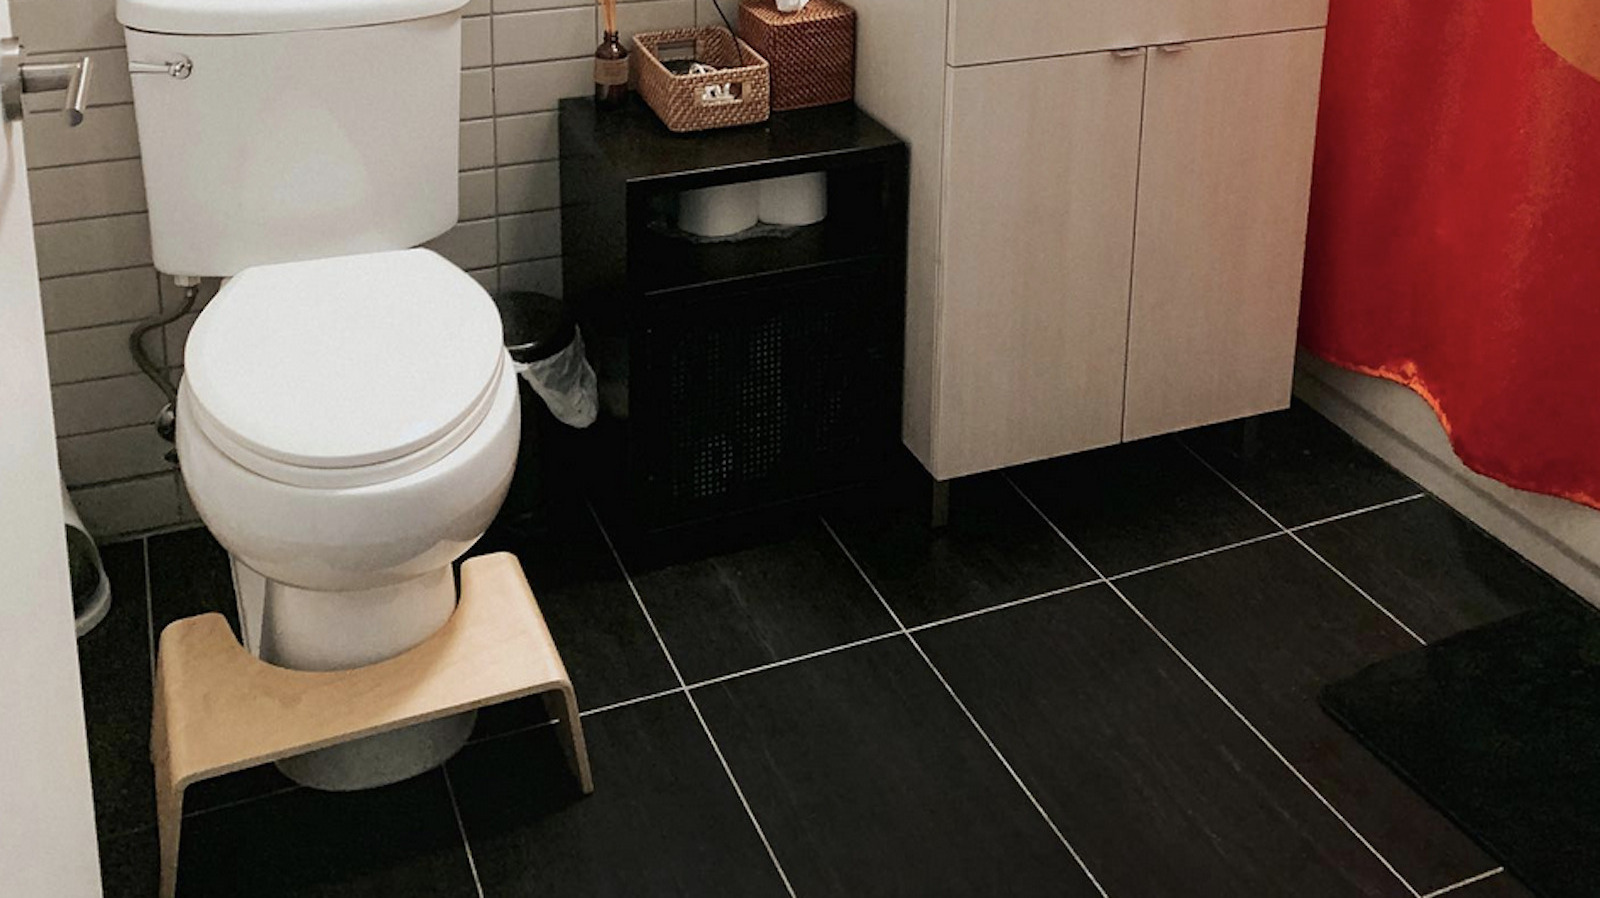 Tips For Seamlessly Incorporating A Squatty Potty Into Your Bathroom Design